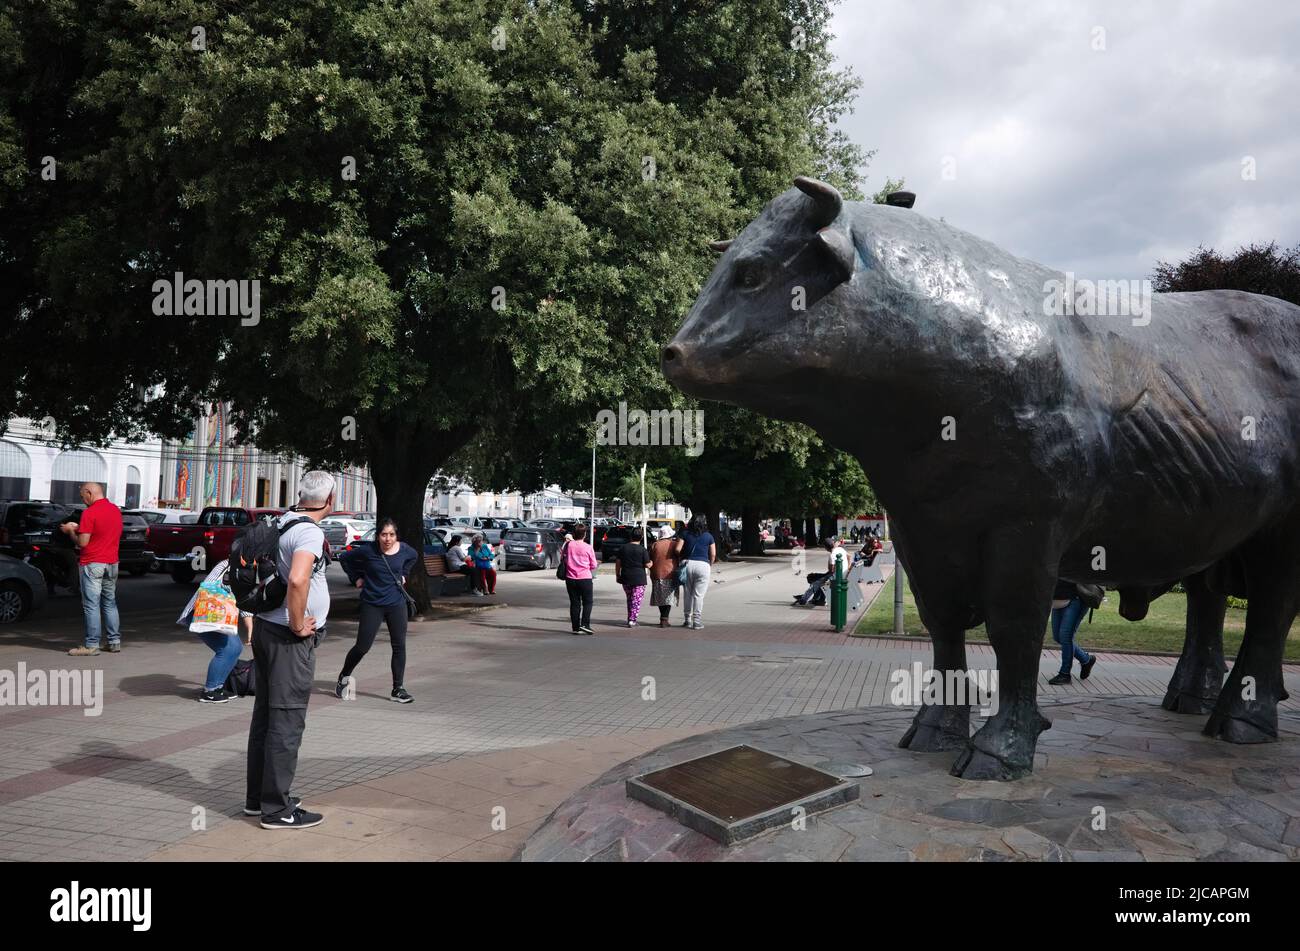 Osorno, Chile - February, 2020: Metal monument to the bull in Plaza de Armas de Osorno dedicated to culture and traditions of animal husbandry Stock Photo